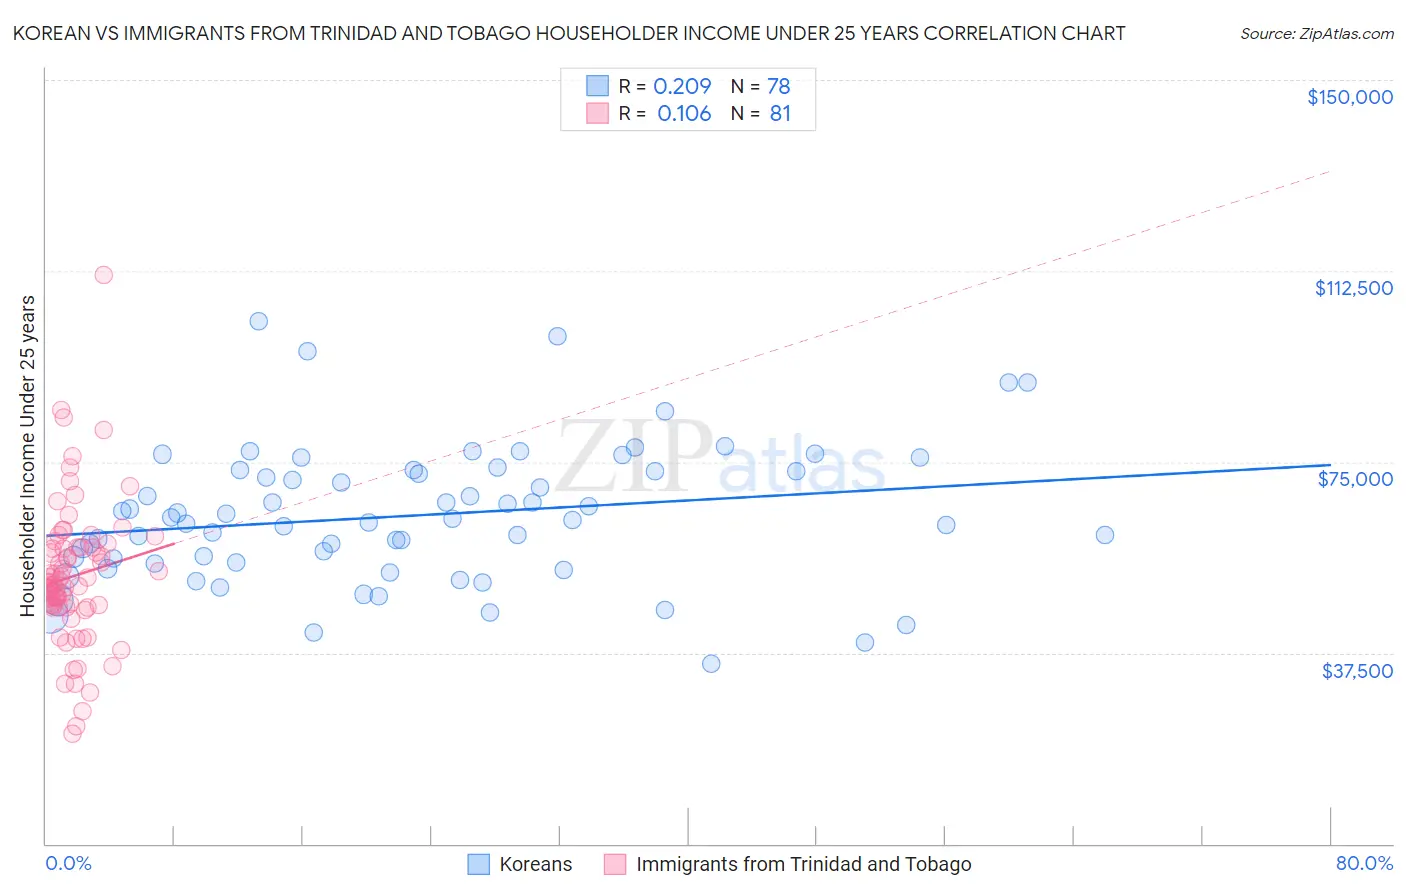 Korean vs Immigrants from Trinidad and Tobago Householder Income Under 25 years